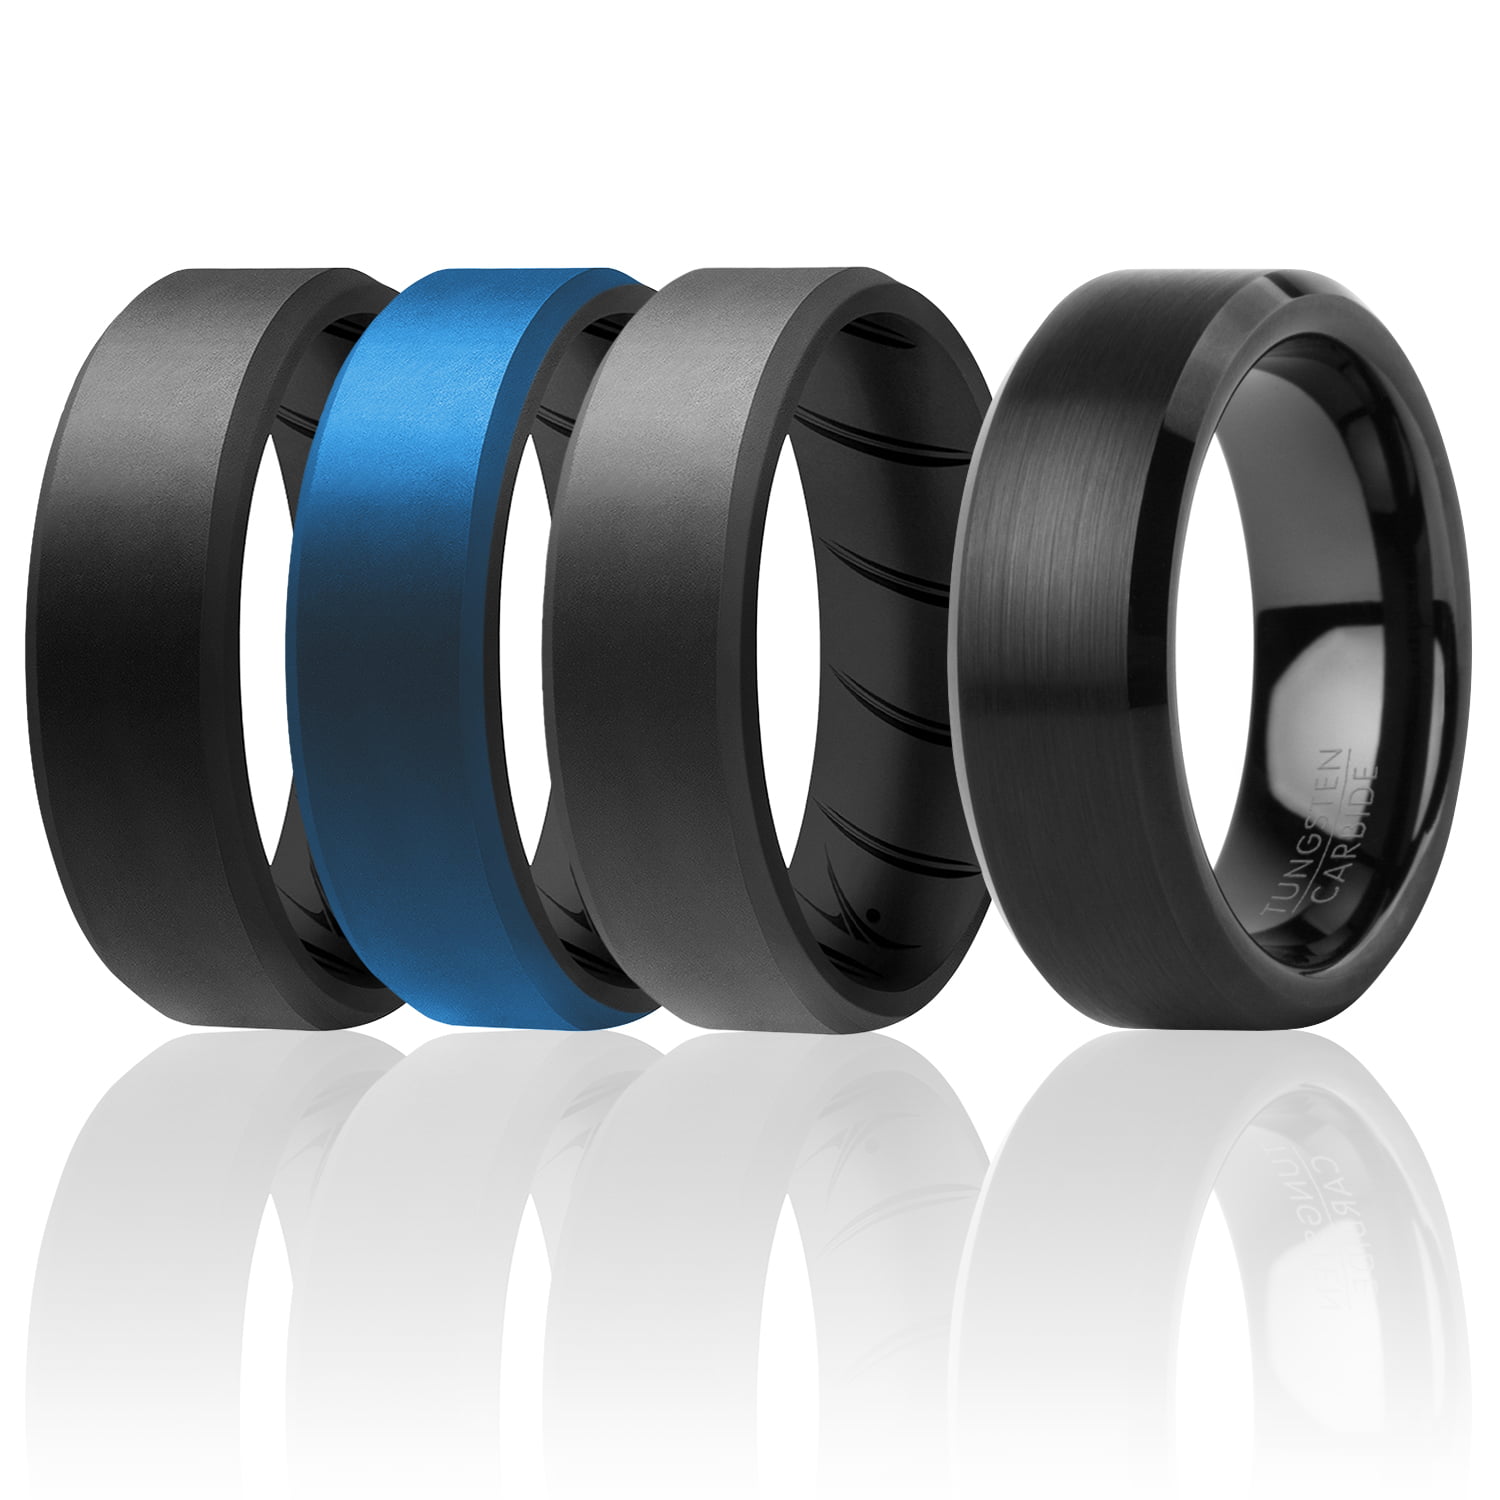 ROQ ROQ Silicone Rings for Men 4 Pack of Silicone Rubber Bands